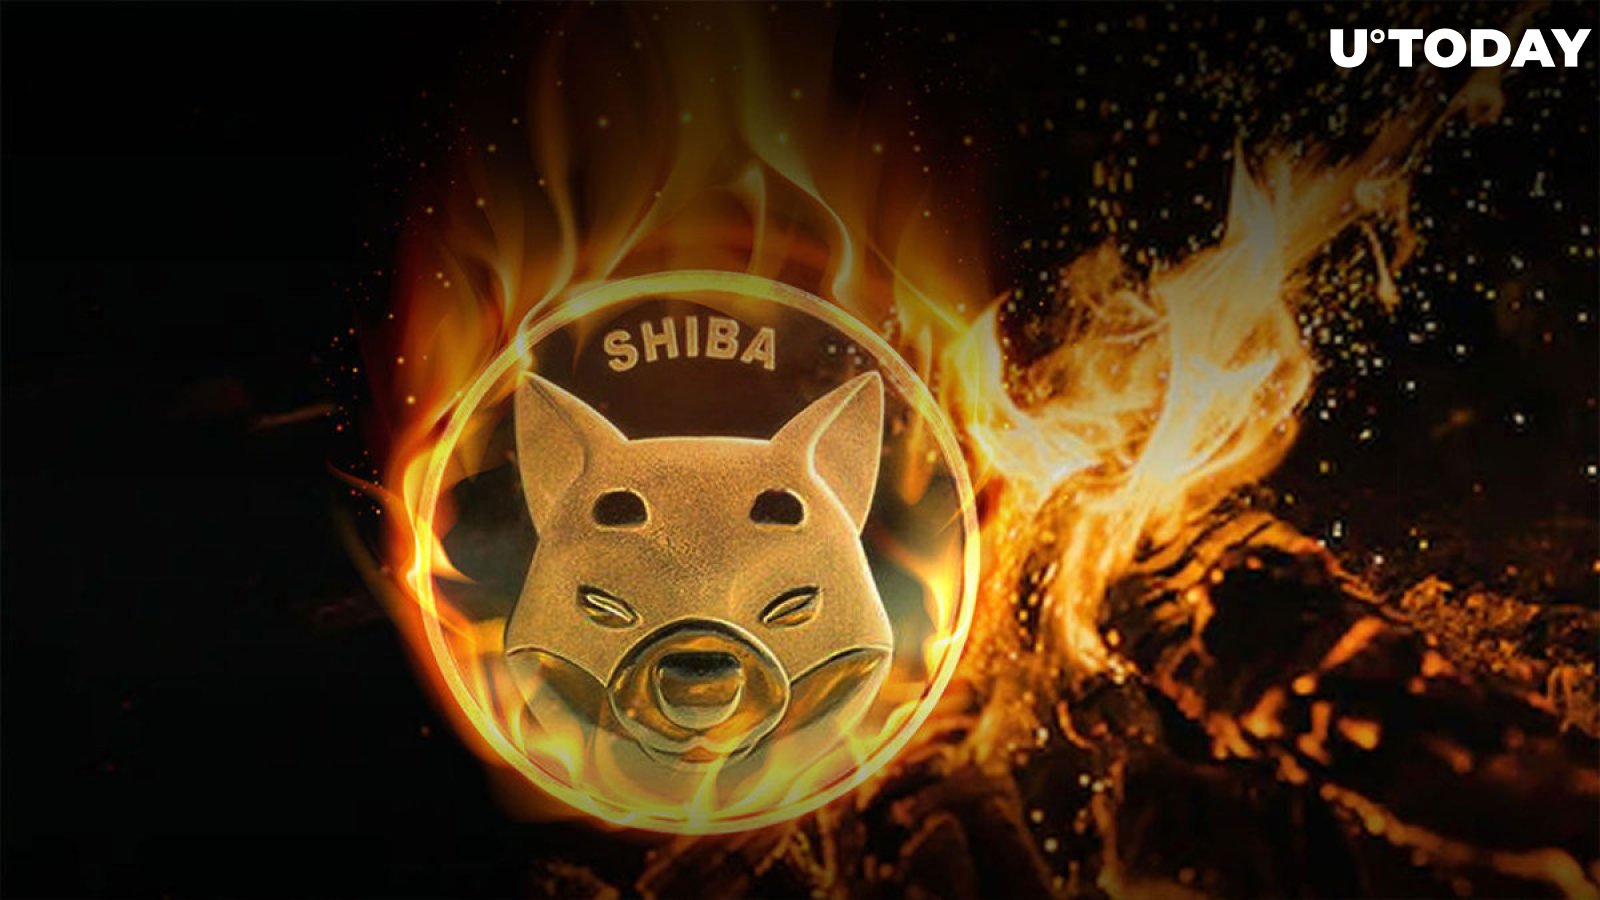 Shiba Inu Burn Rate Jumps 706% as Holder Number Soars High Overnight